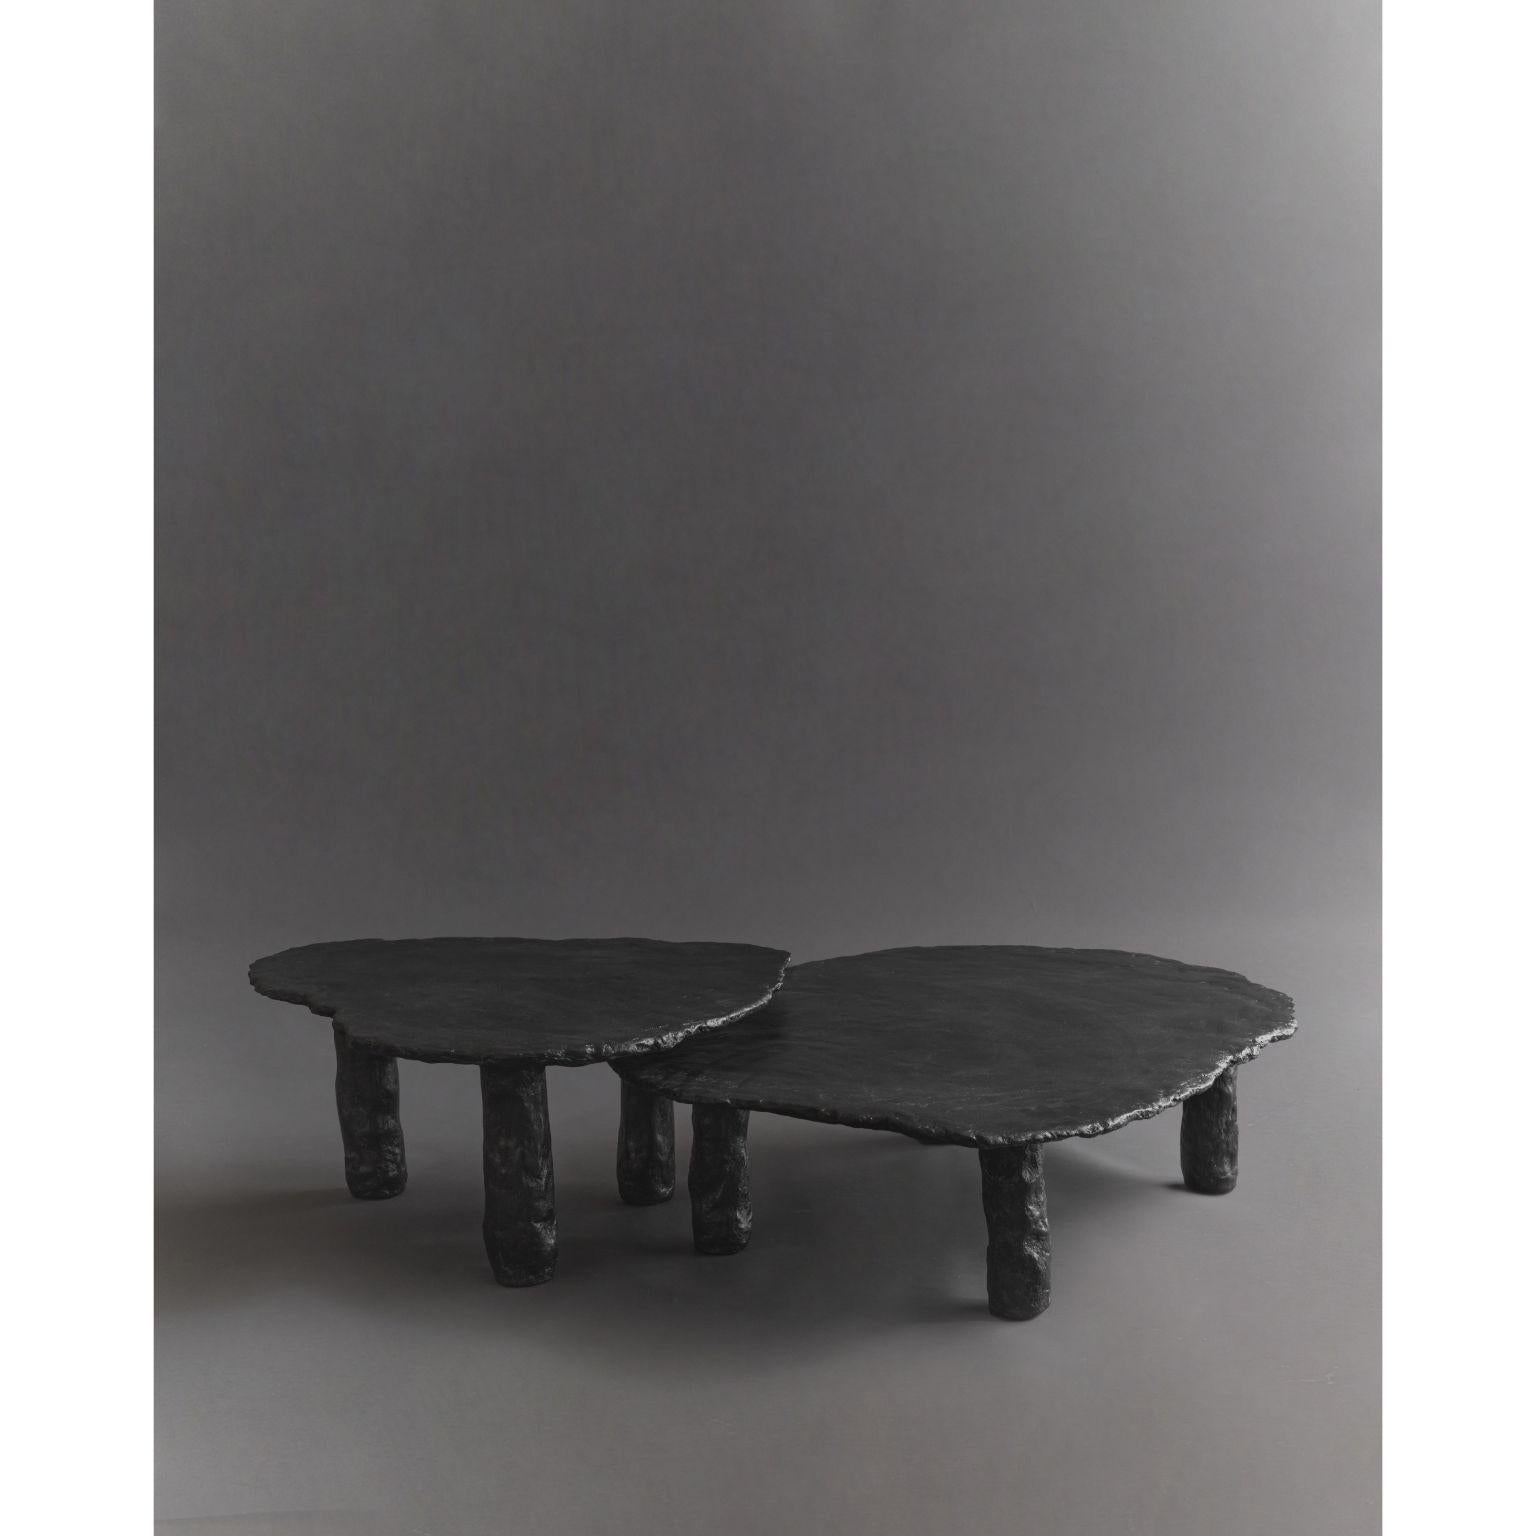 Roca nested coffee tables by Ombia.
Dimensions: W 122 x D 96.5 x H 30.5 cm / W 84 x D 76.5 x H 36 cm
Materials: Mix media, black matte limewash finish. 
Custom sizes and finishes upon request.


Ombia is a ceramic sculpture and design studio